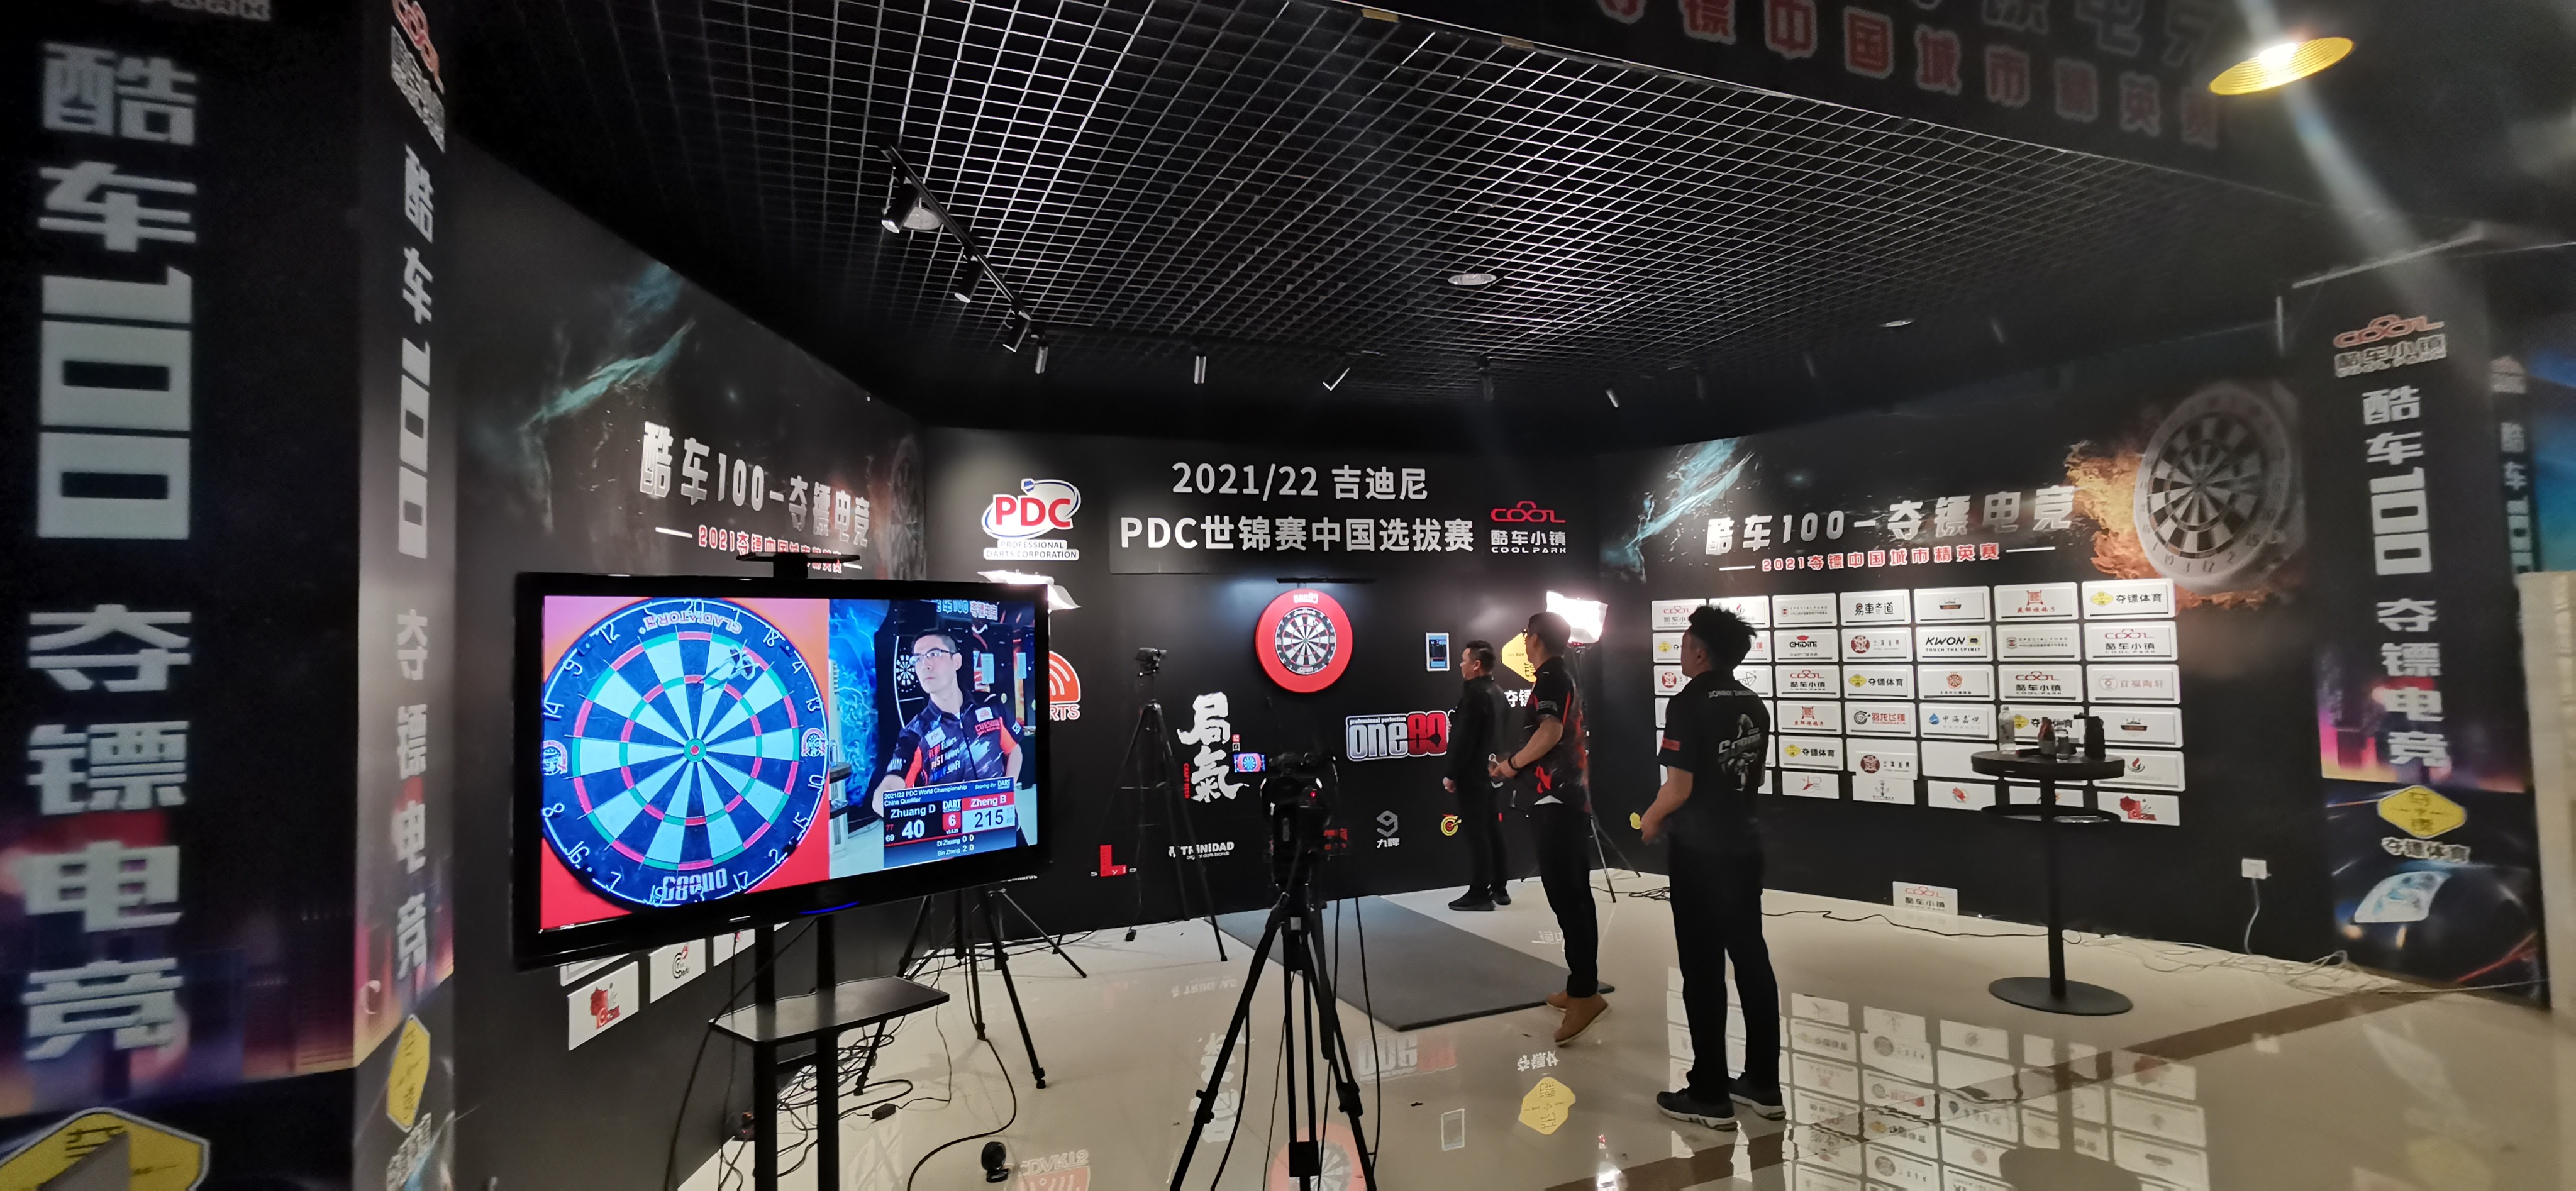 PDC Darts on Twitter: "🇨🇳𝗖𝗵𝗶𝗻𝗮 𝗣𝗿𝗲𝗺𝗶𝗲𝗿 𝗟𝗲𝗮𝗴𝘂𝗲 𝗡𝗶𝗴𝗵𝘁 𝗙𝗼𝘂𝗿 Live now on PDCTV, the top stars of darts are battling it out Night Four of the China Premier League. 📺https://t.co/hSz0zP5tWg